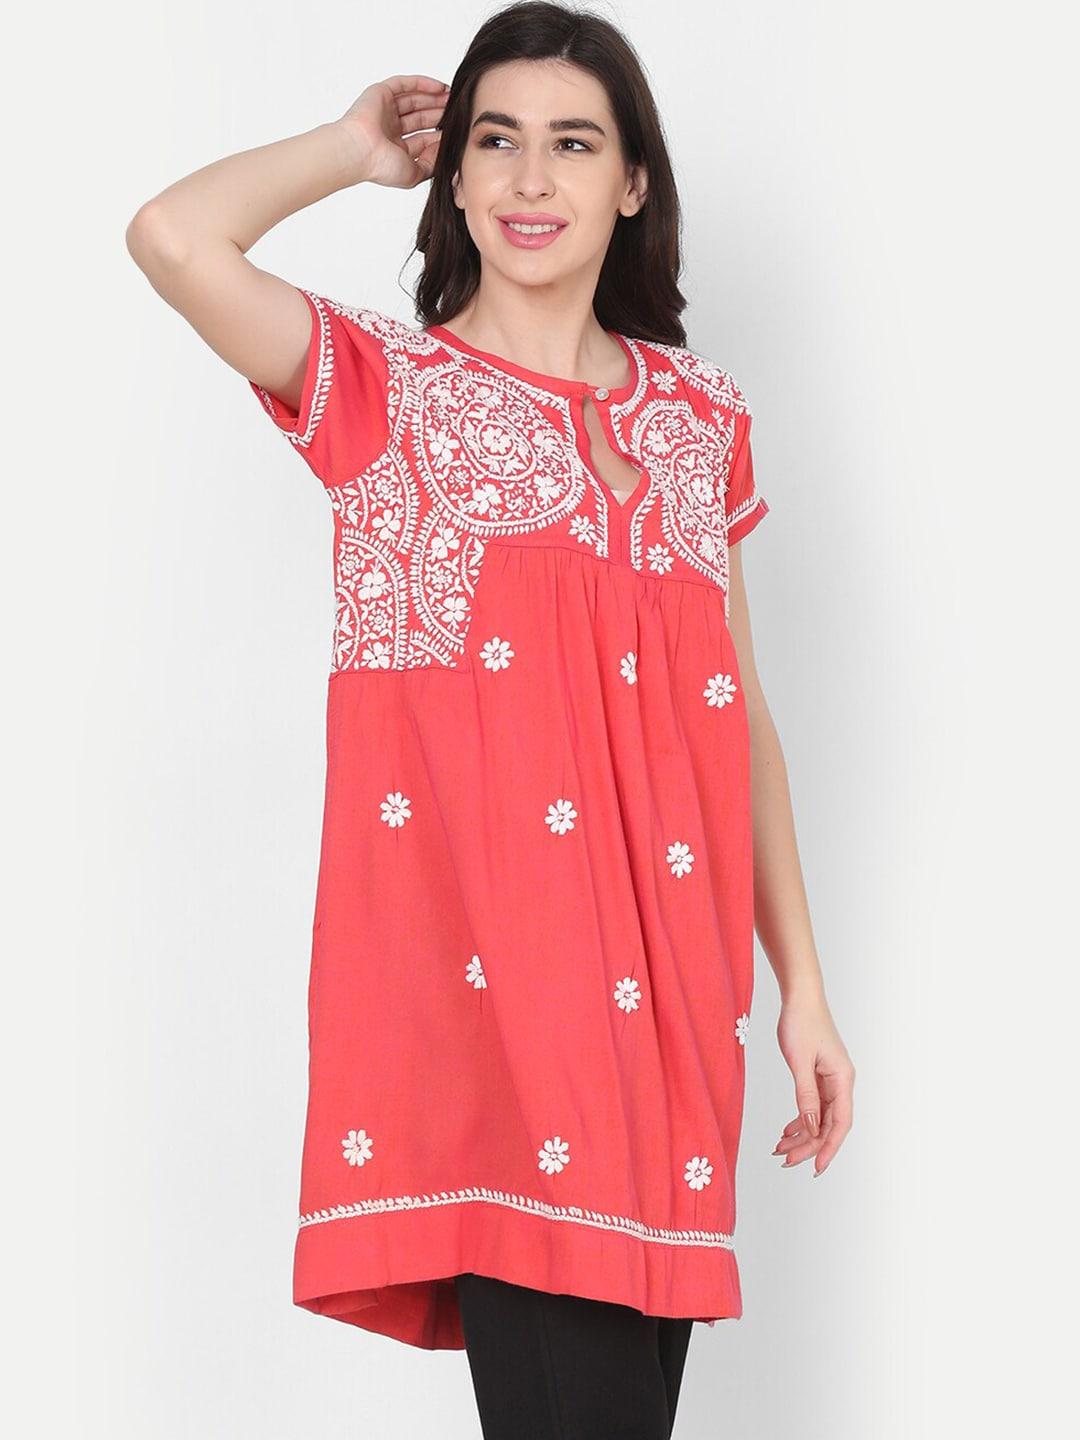 house of kari pink & white embroidered tunic